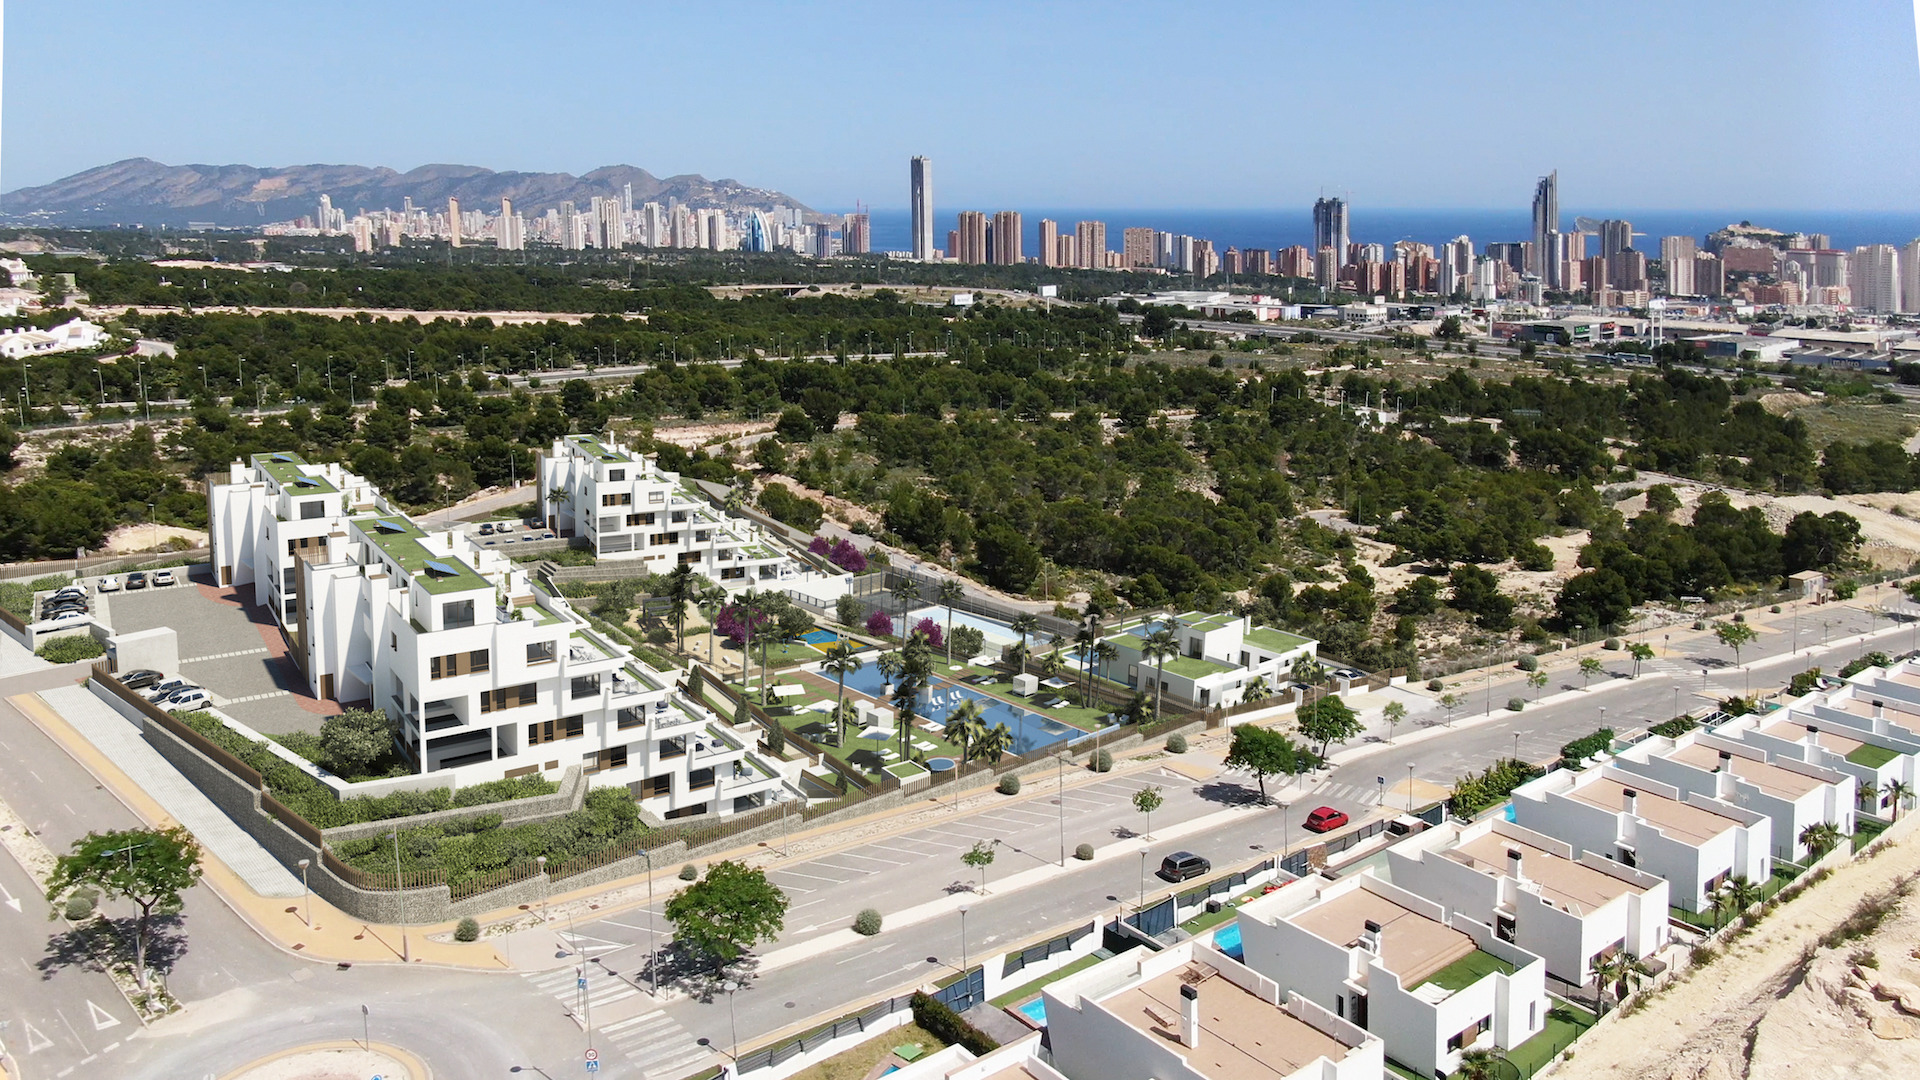 New development of luxury apartments and villas in Finestrat